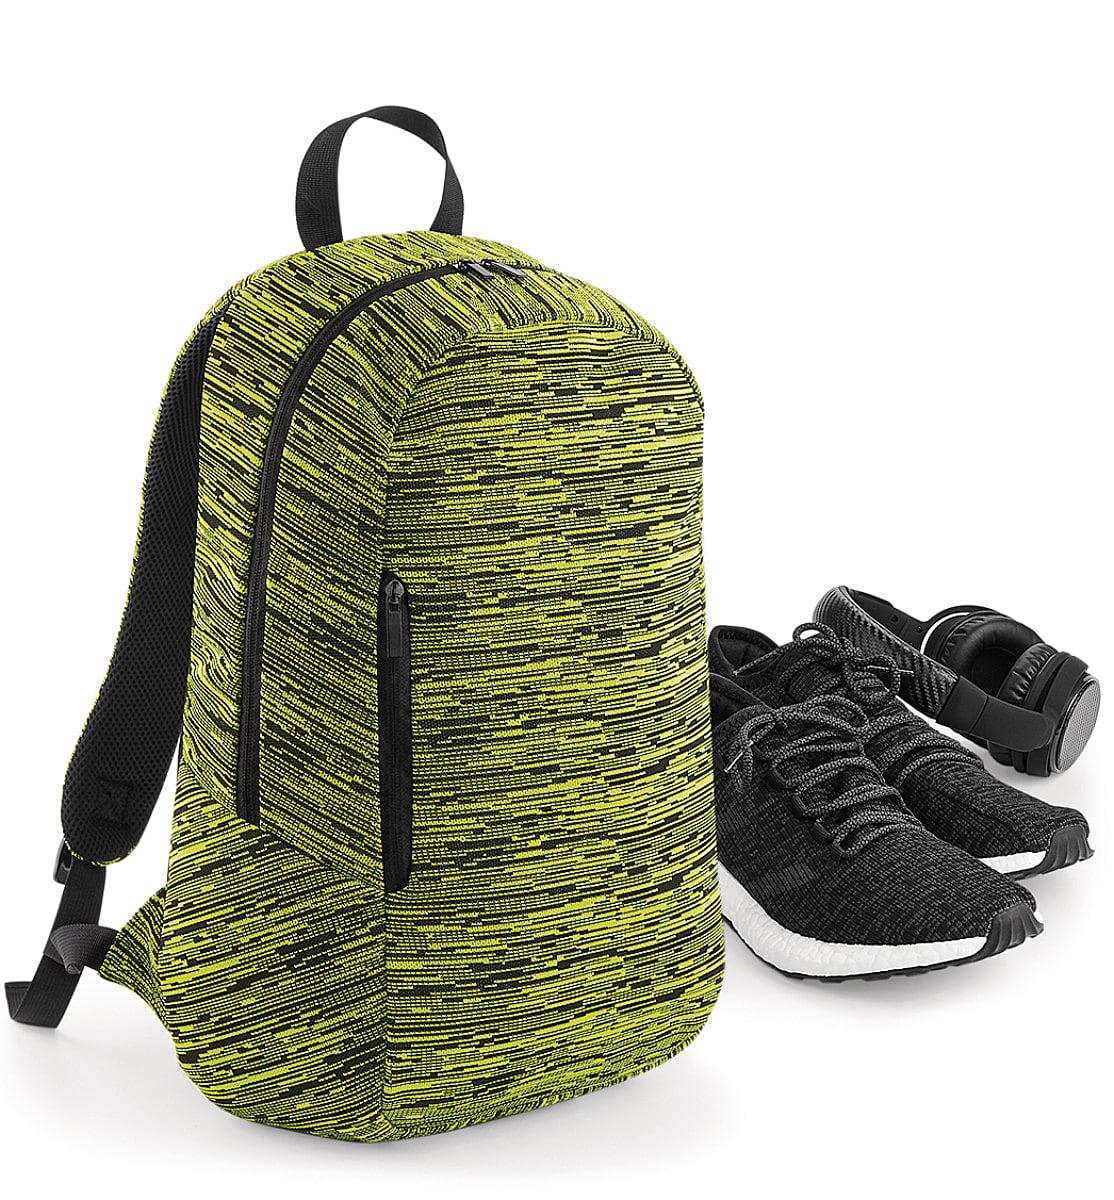 Bagbase Duo Knit Backpack in Electric Yellow / Black (Product Code: BG198)